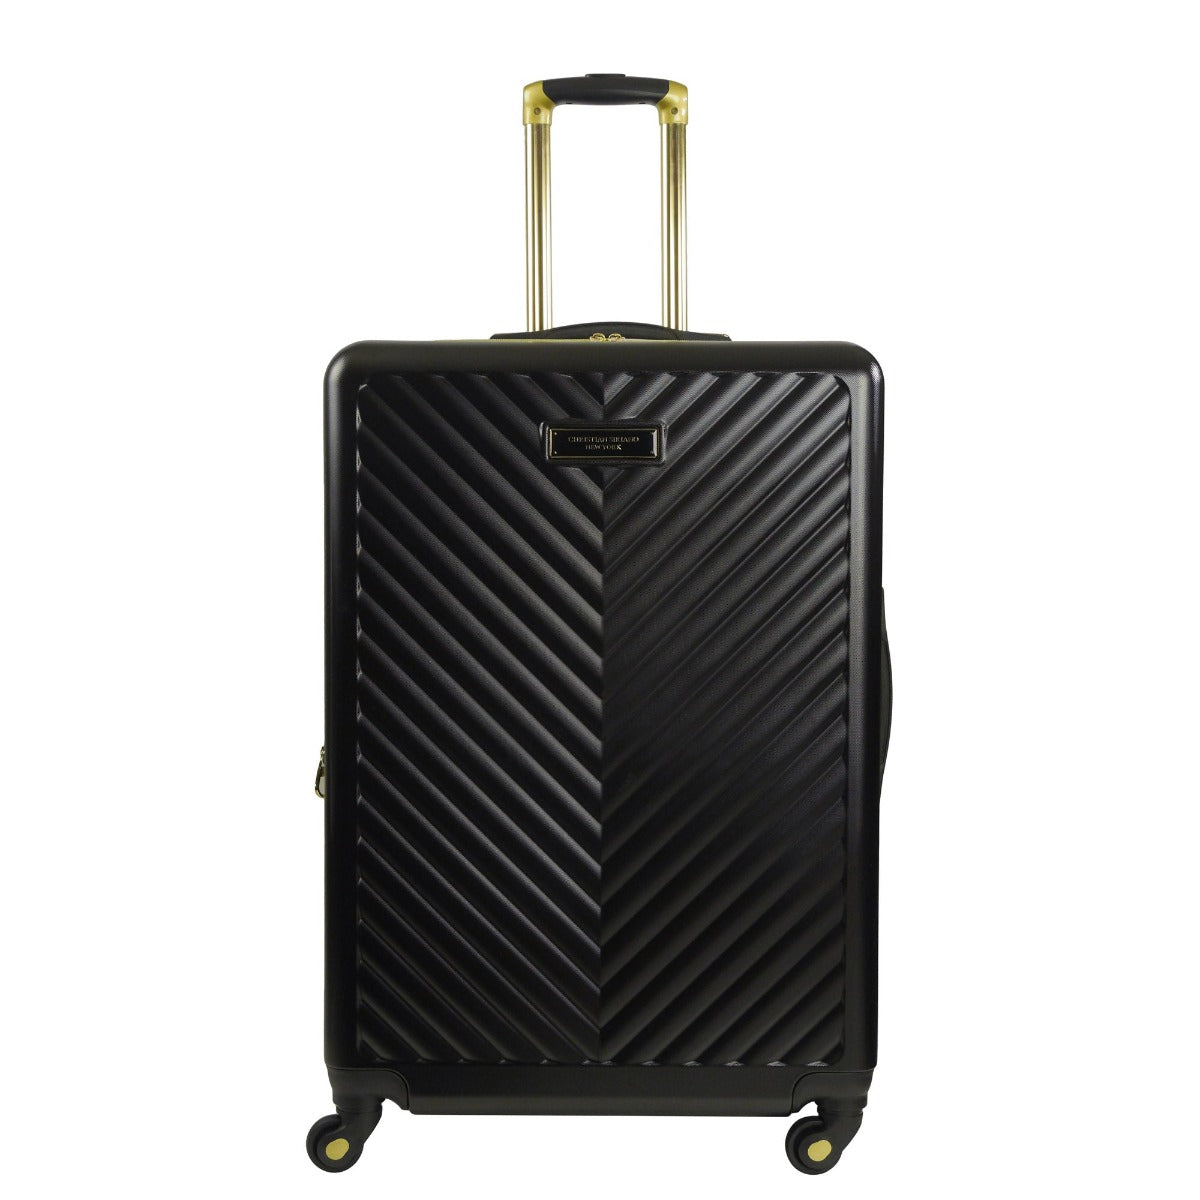 Christian Siriano Addie 29 inch hardside spinner suitcase black - best durable checked luggage for travel